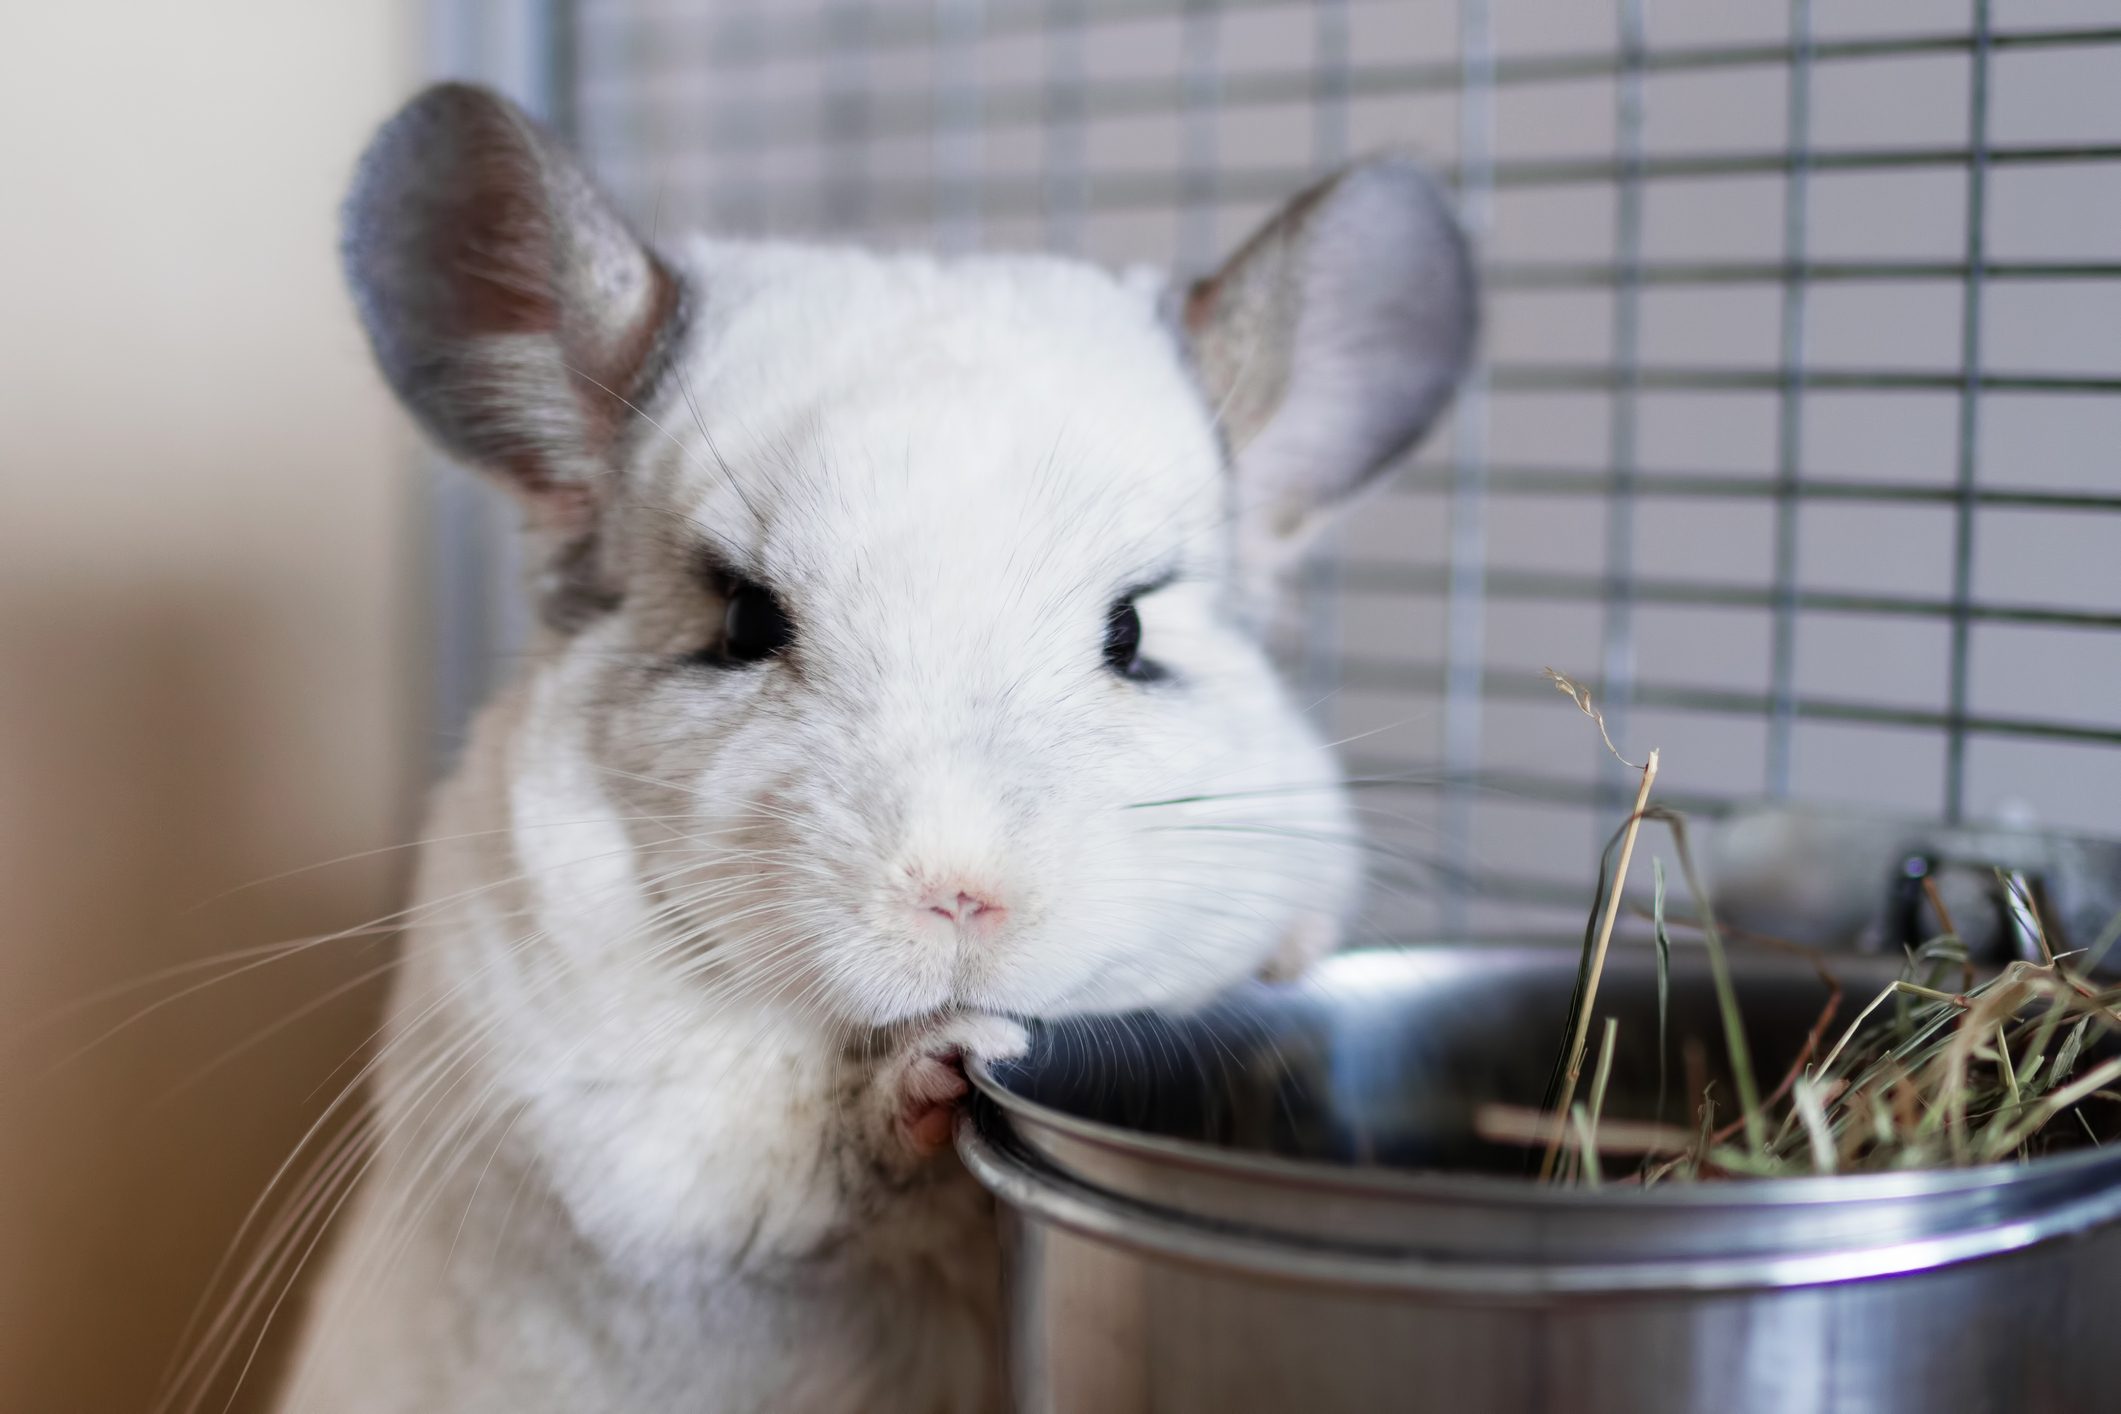 Cute chinchilla of white color is sitting in its house near to bowl with hay.